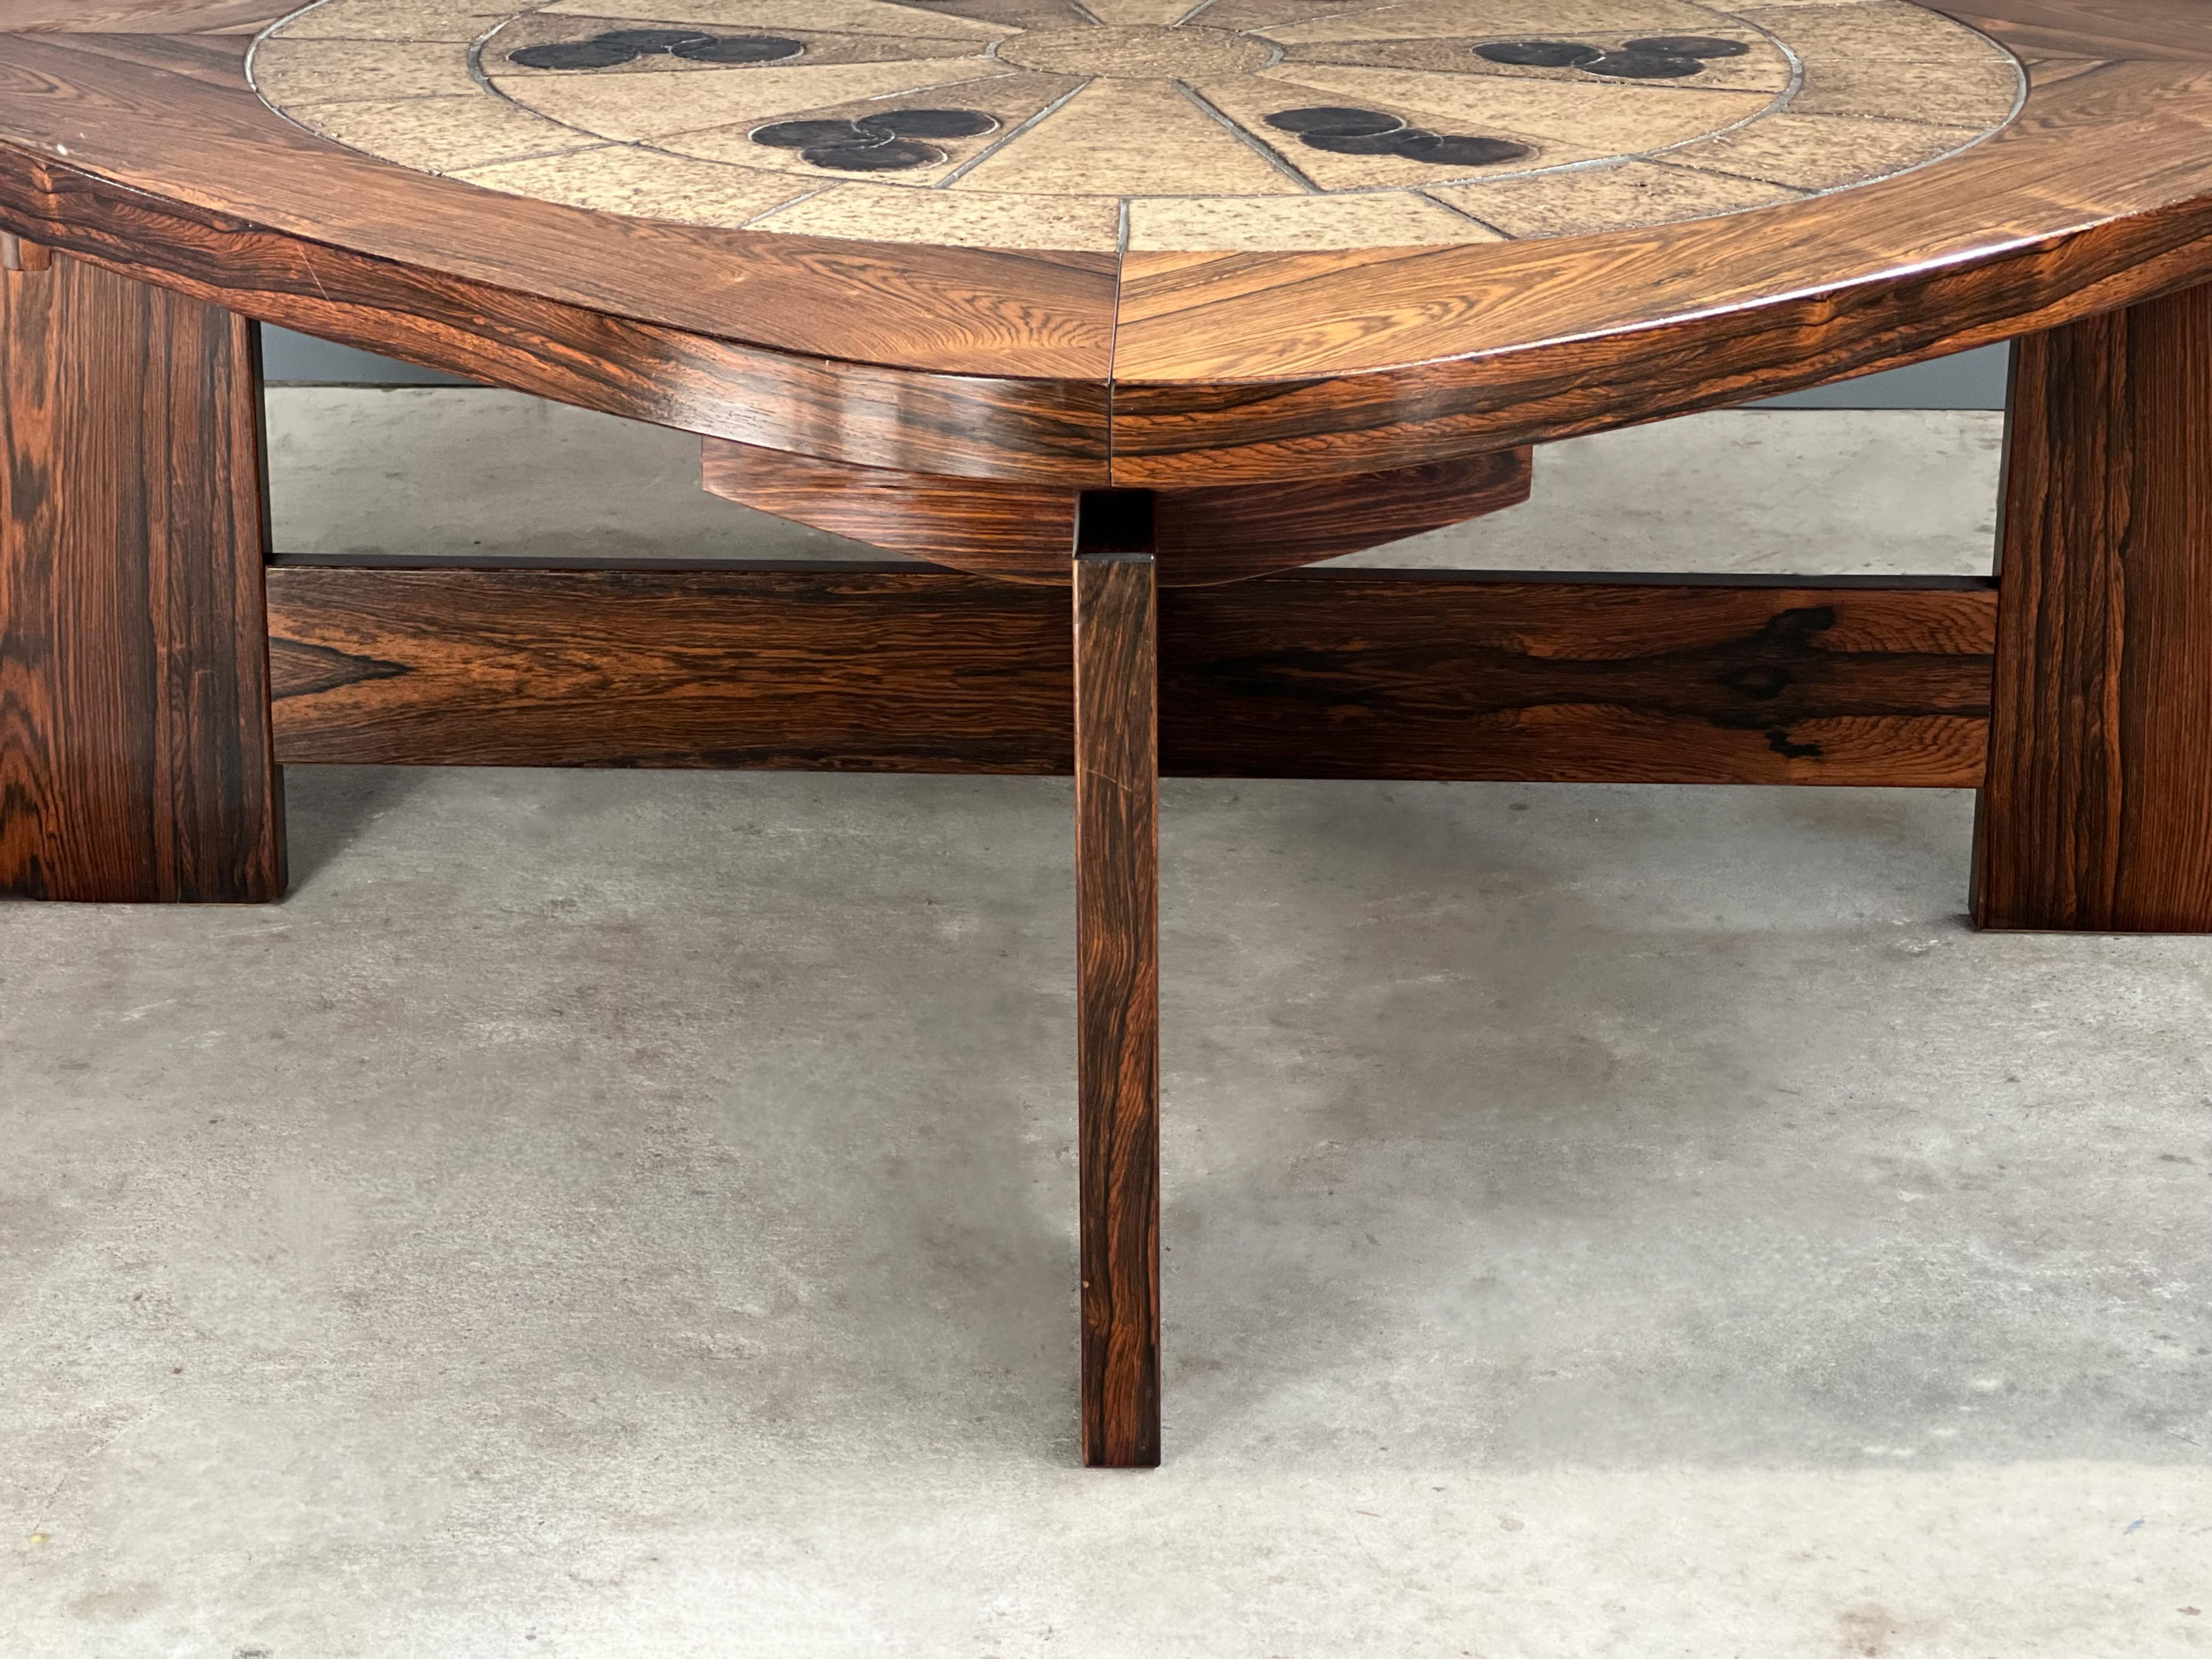 Ceramic Brazilian Rosewood and Tile Coffee Table Attributed to Tue Poulsen